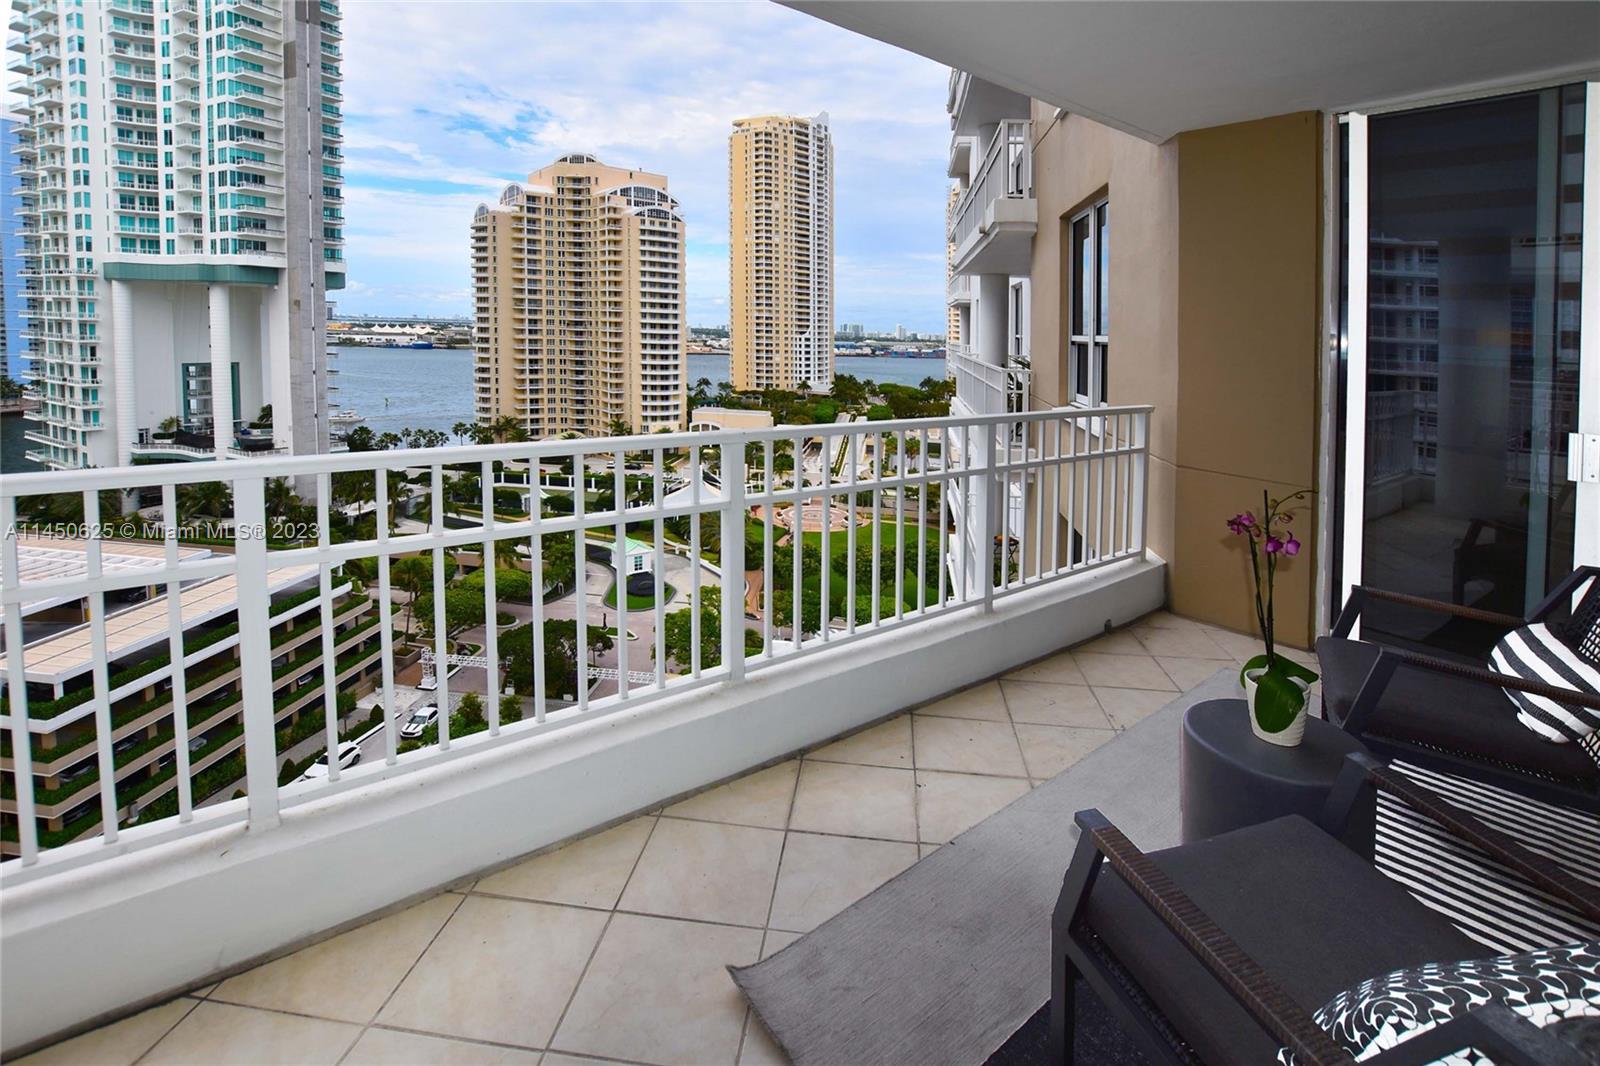 Live the Island Lifestyle at its best in heart of Brickell. tastefully remodeled and large 1 bed/1.5 bath condo in the exclusive Brickell Key Island. unit features gorgeous granite countertops. TWO PARKING SPACES. Building features resort style amenities, full gym, spa, racquetball, child play area, security and more. Perfect location with only steps away from Brickell City Centre, great shopping, restaurants, supermarkets and minutes from Miami Beach, Coconut Grove and Downtown. Feel free to enjoy the views from your balcony as well as having the option to take pleasure in a run or  walk on the path around the entire island.